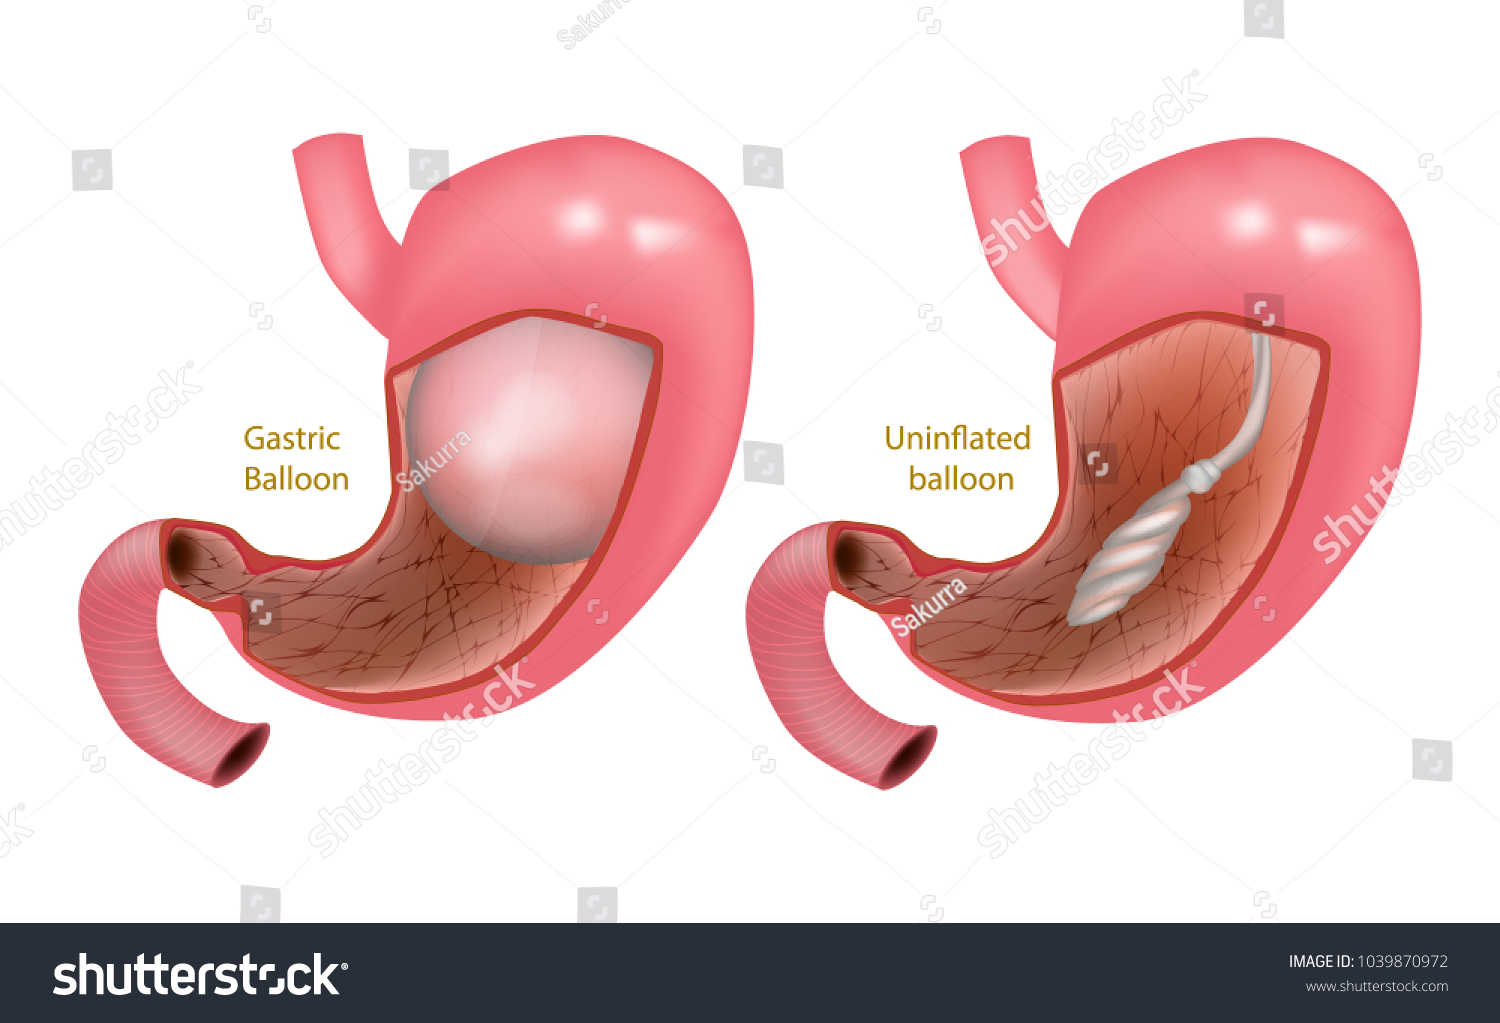 SVG of Intra Gastric Balloon. Orbera Gastric Ballon Inside a Stomach svg